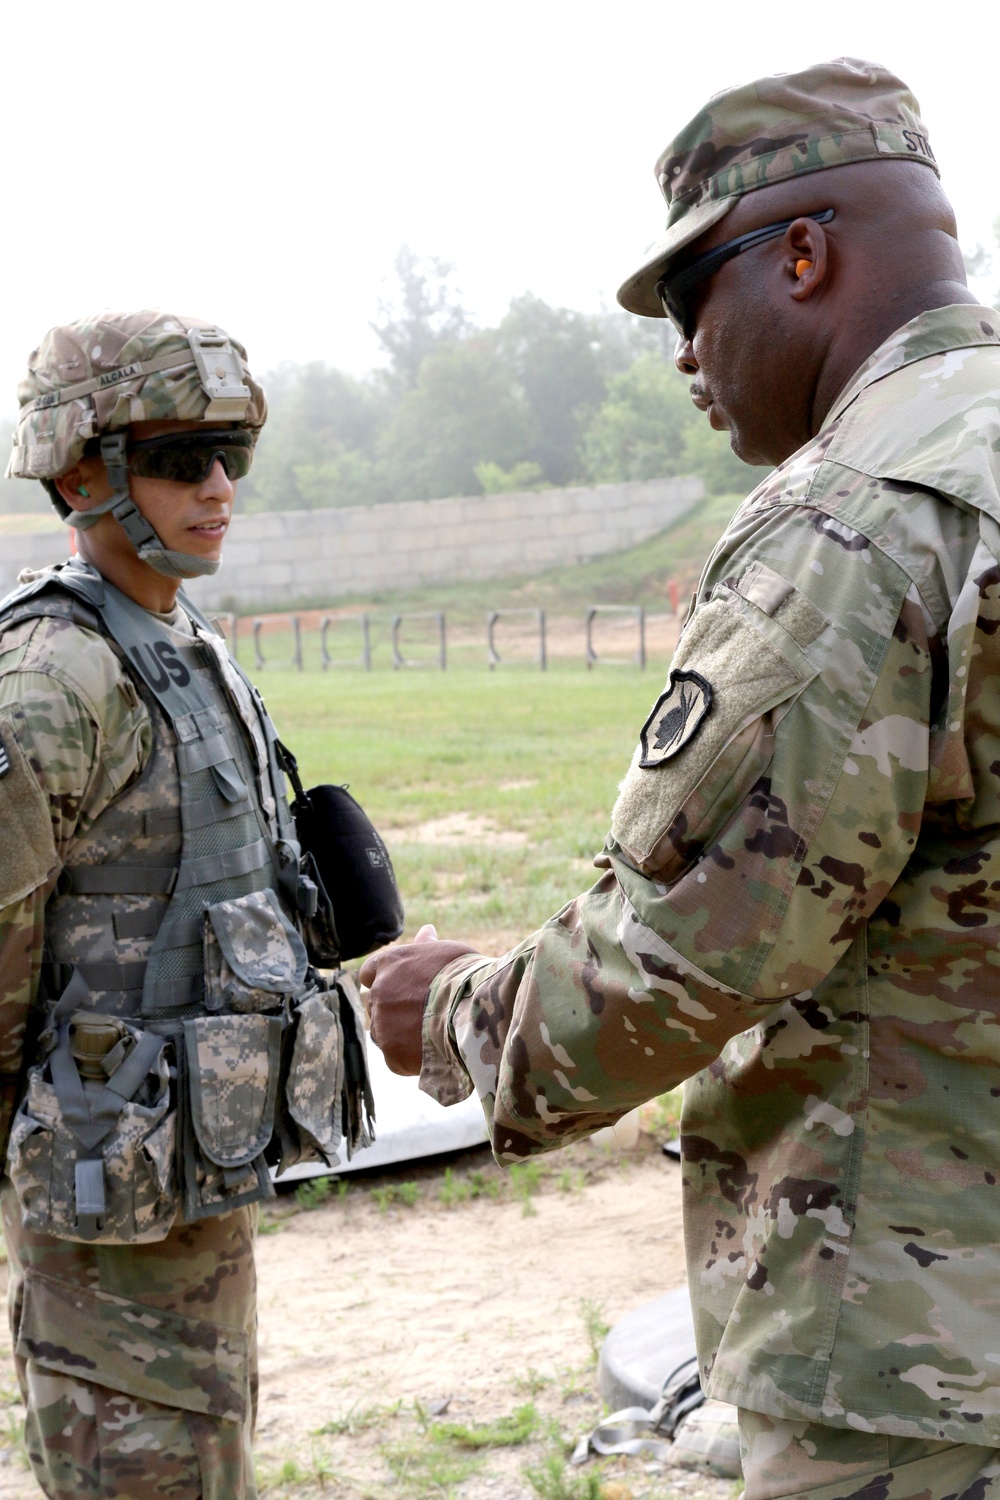 98th Training Division drill sergeants help in USARC BWC